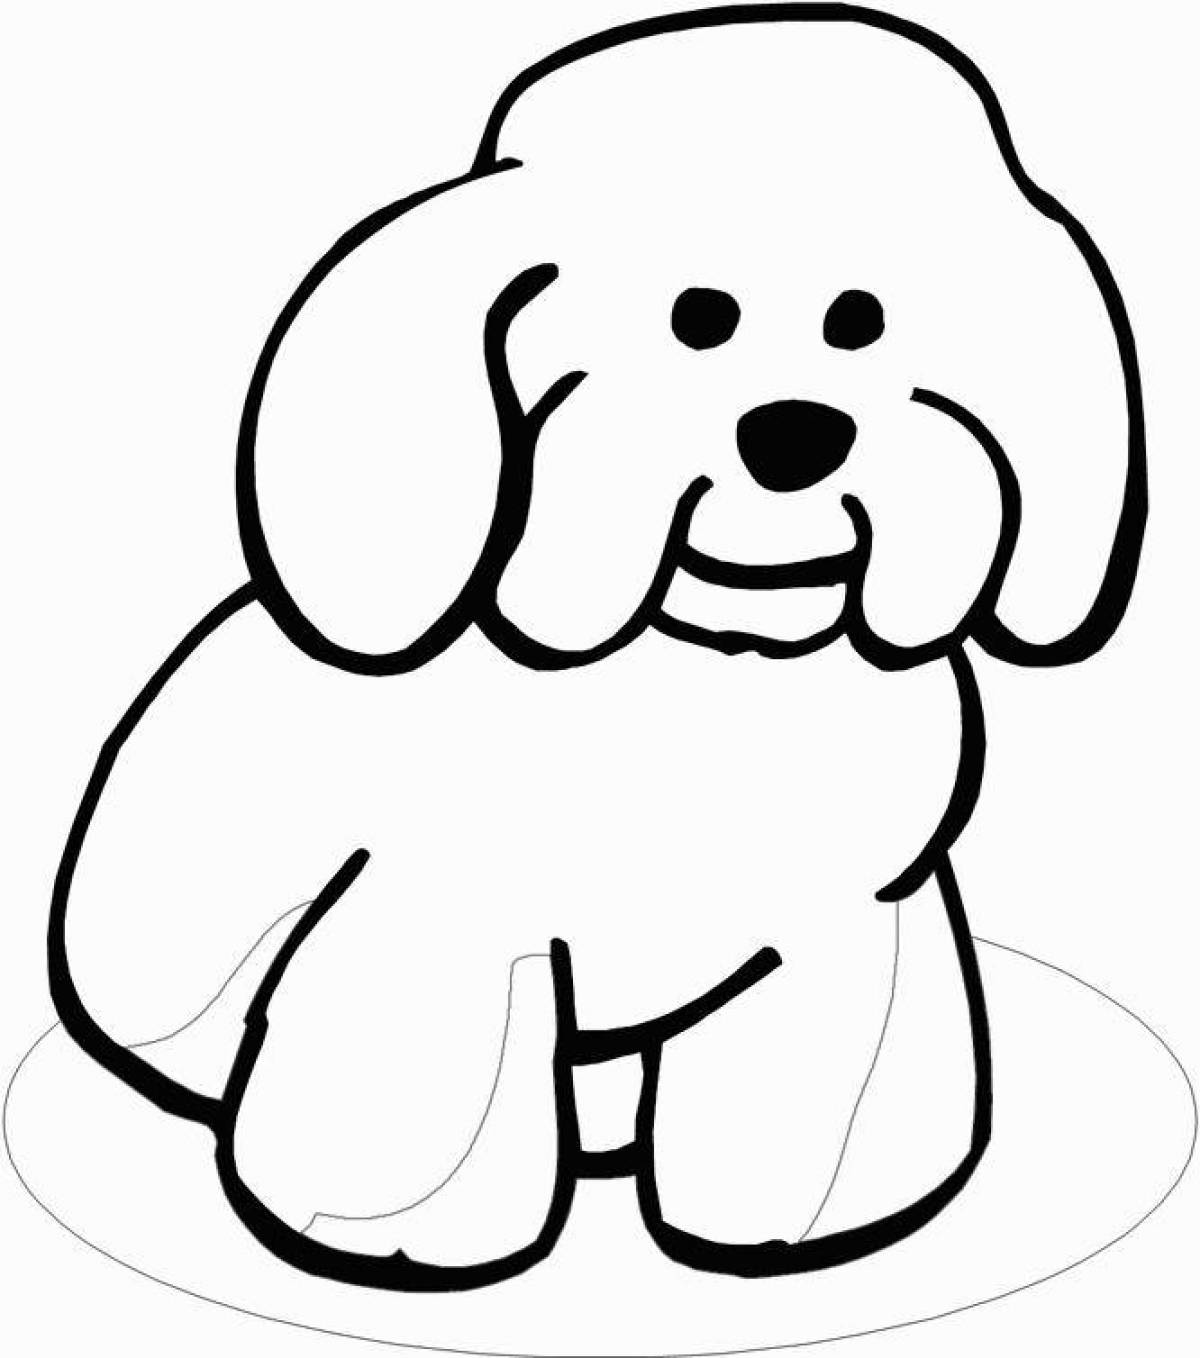 Colorful coloring dog for children